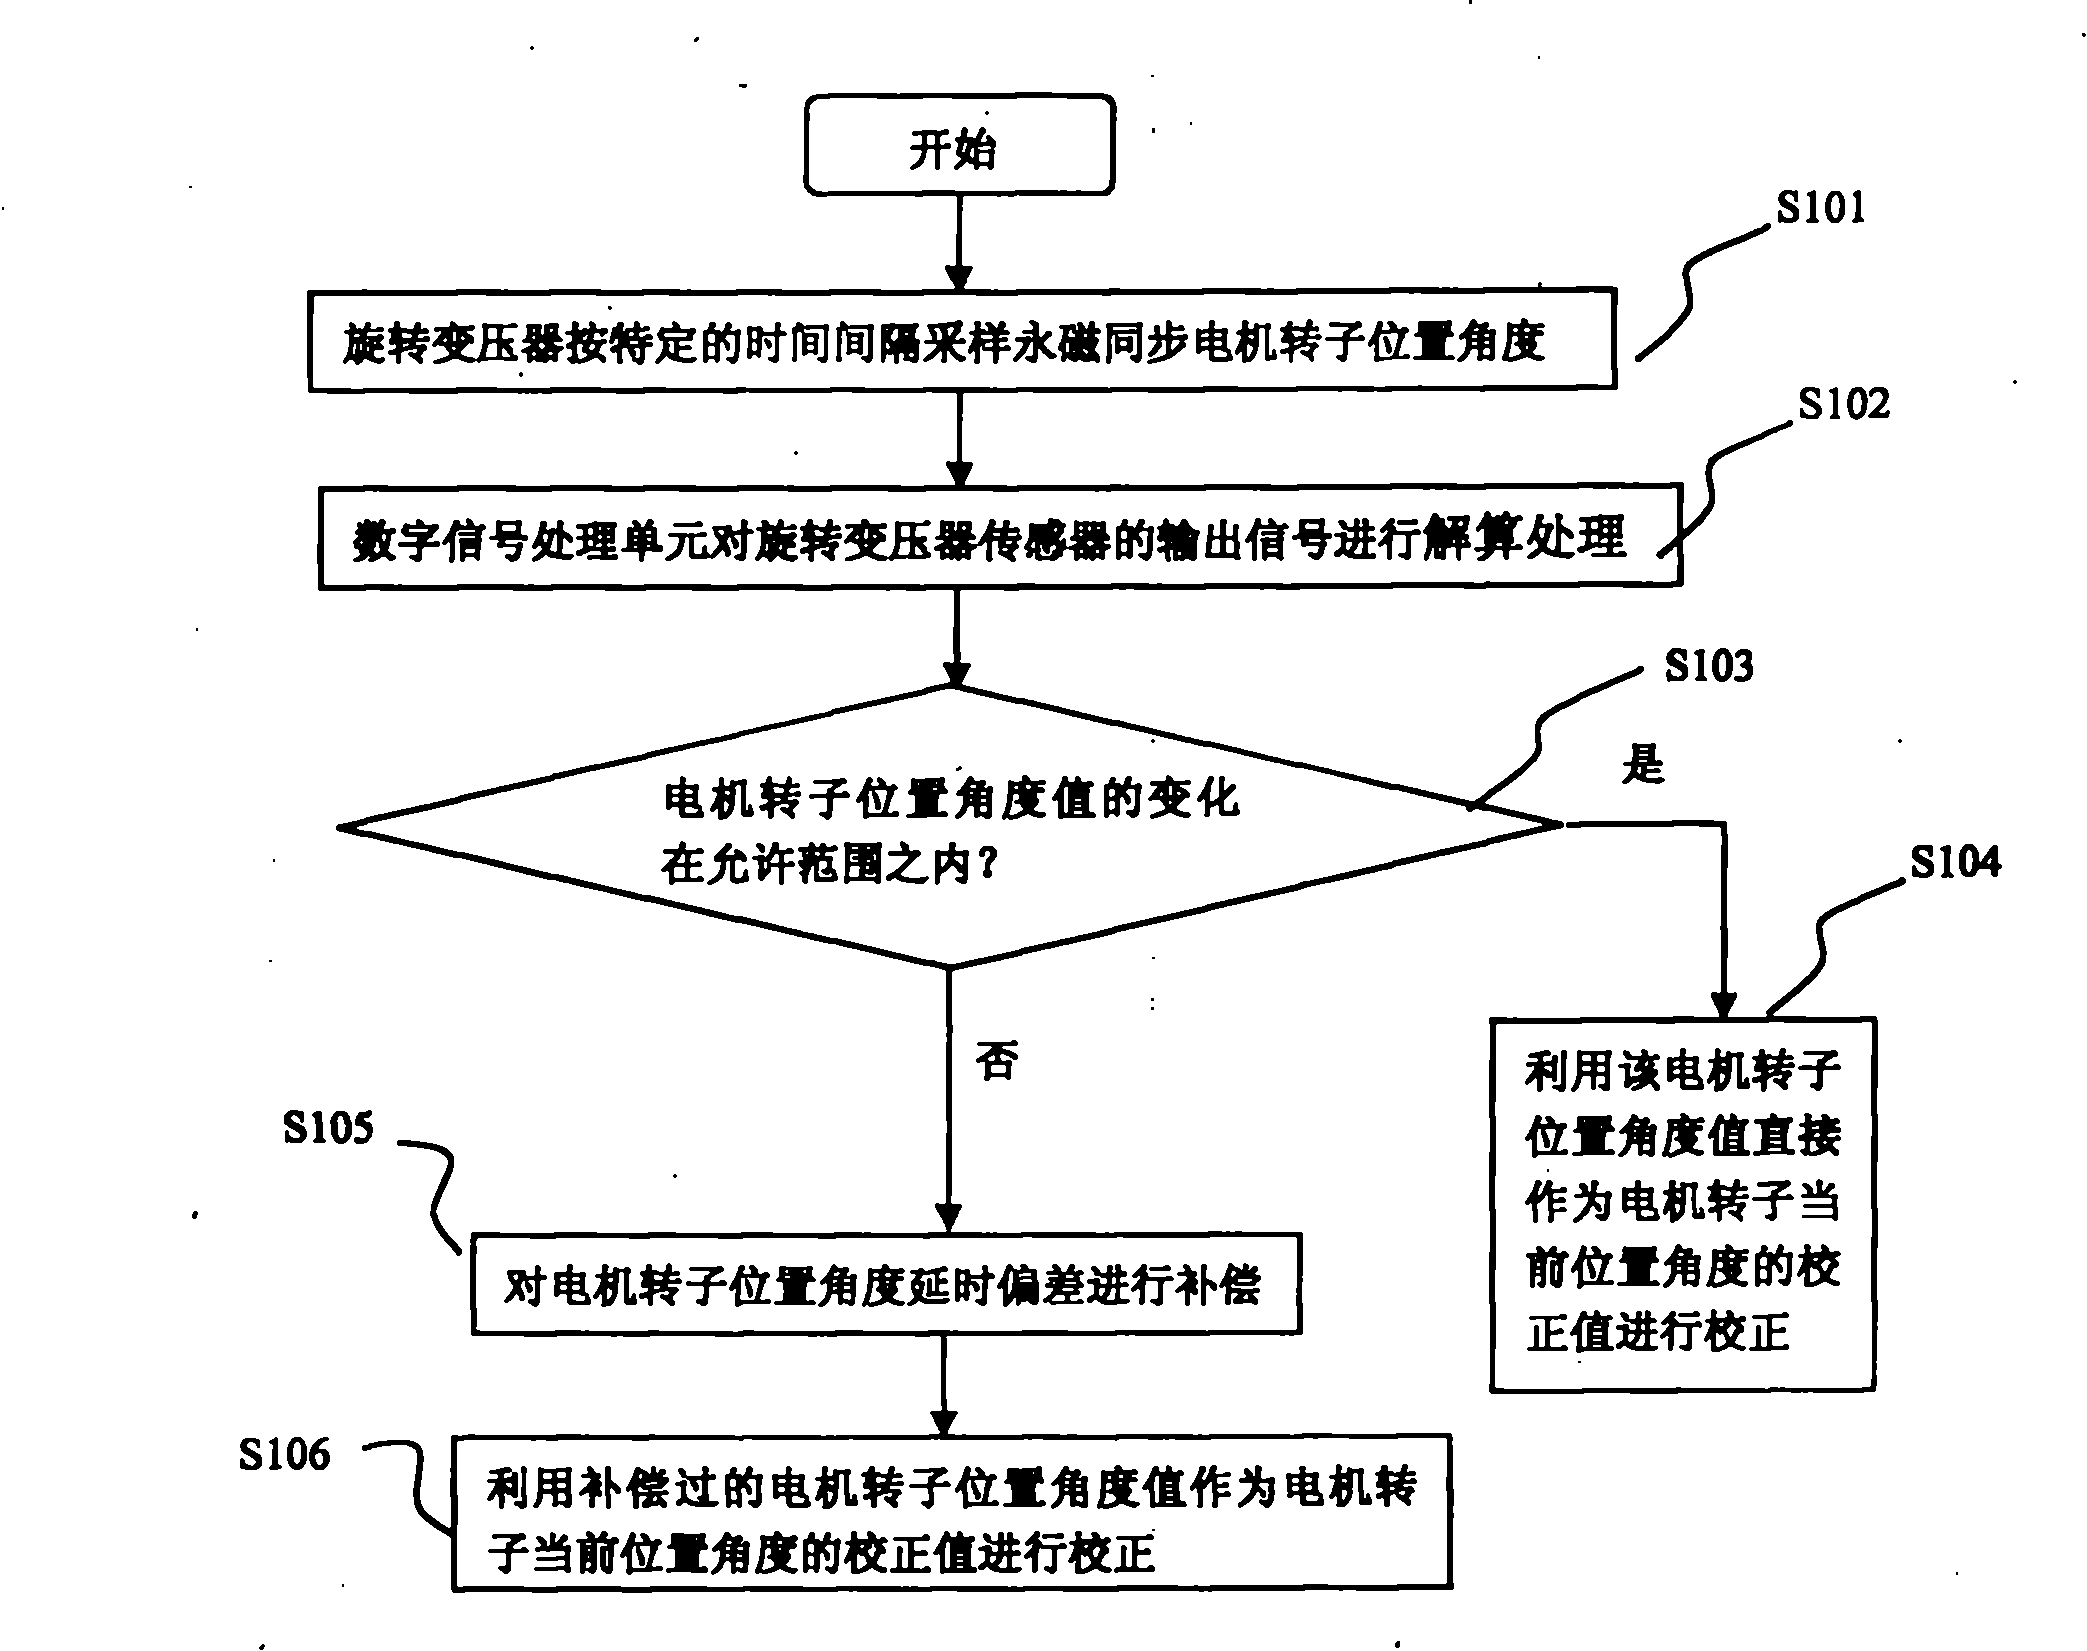 Compensation method for rotor position angle of permanent-magnet motor